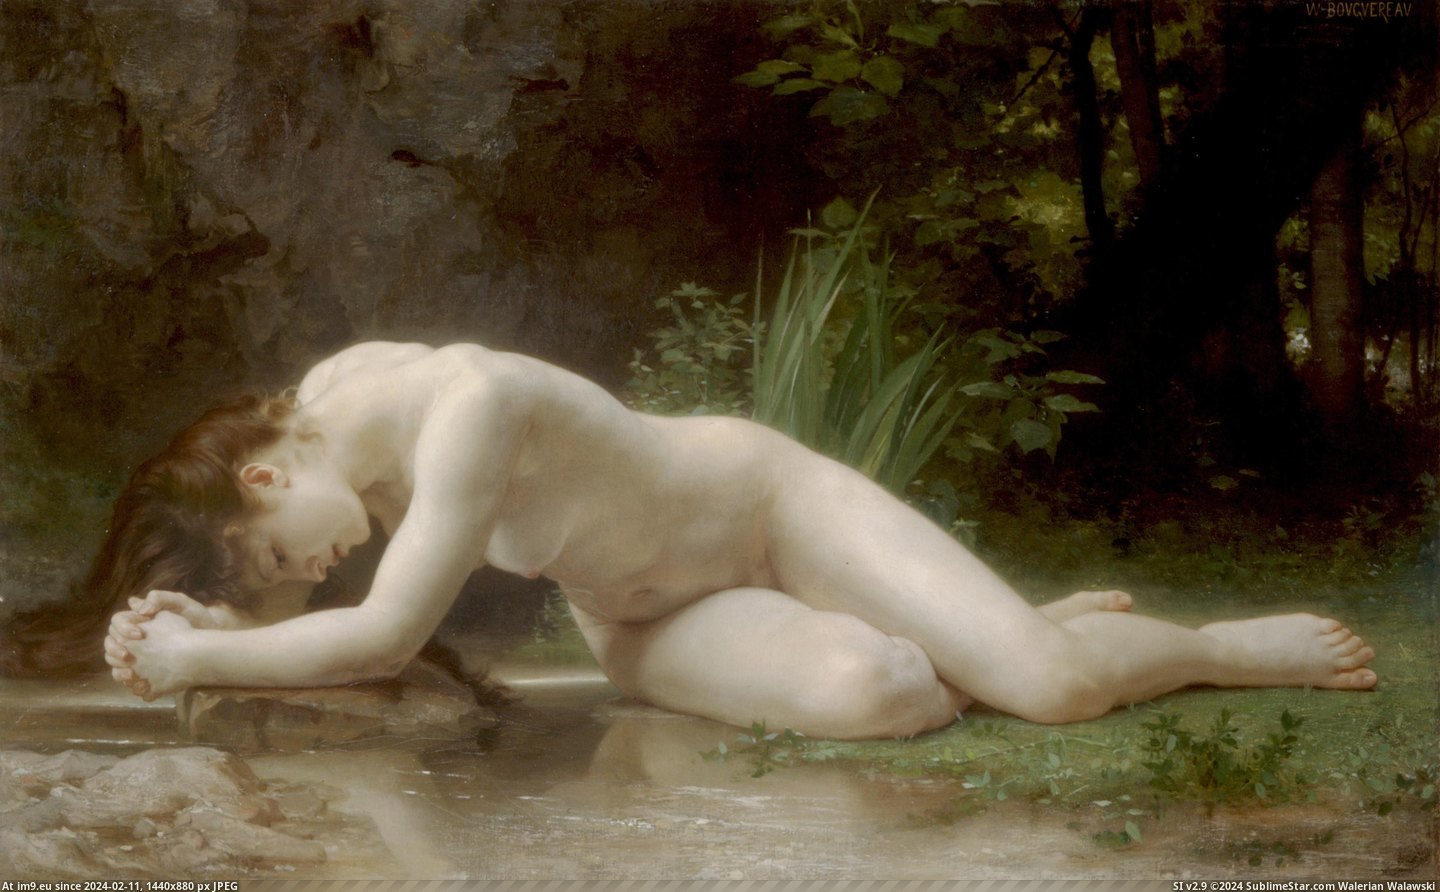 #Art #Painting #Bouguereau #Adolphe #Paintings #William (1884) Biblis - William Adolphe Bouguereau Pic. (Image of album William Adolphe Bouguereau paintings (1825-1905)))